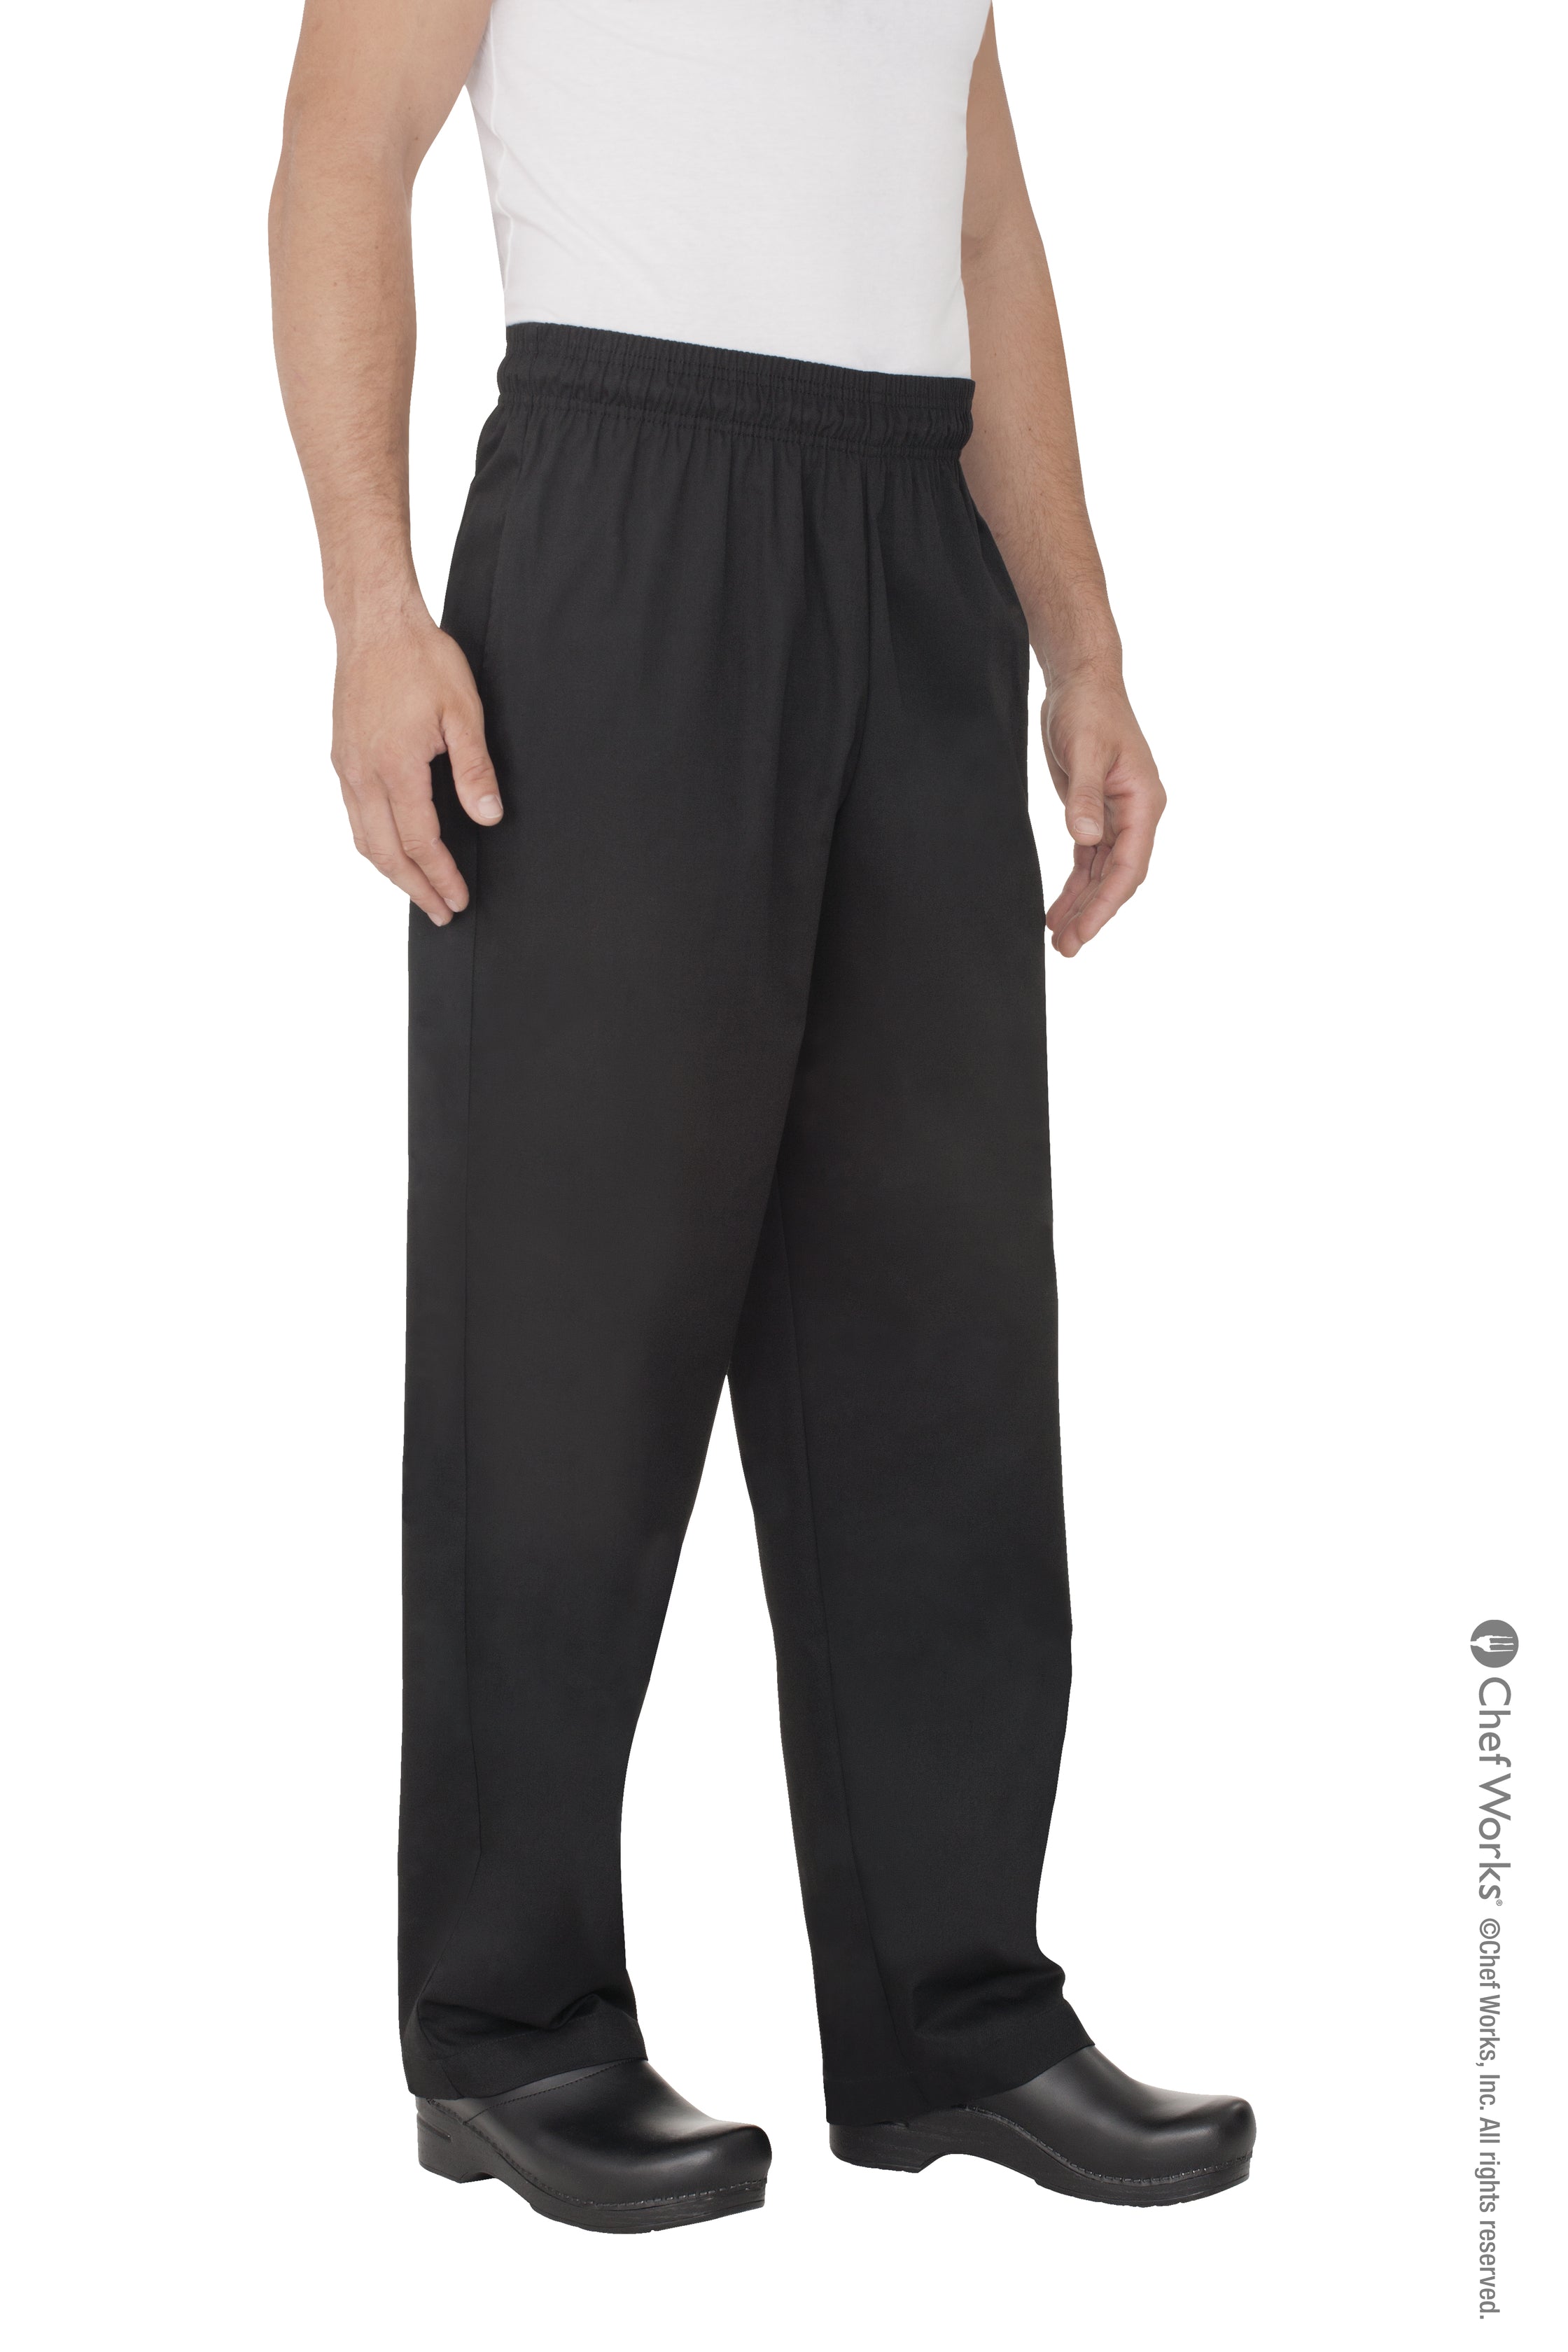 ESSENTIAL BAGGY CHEF PANTS